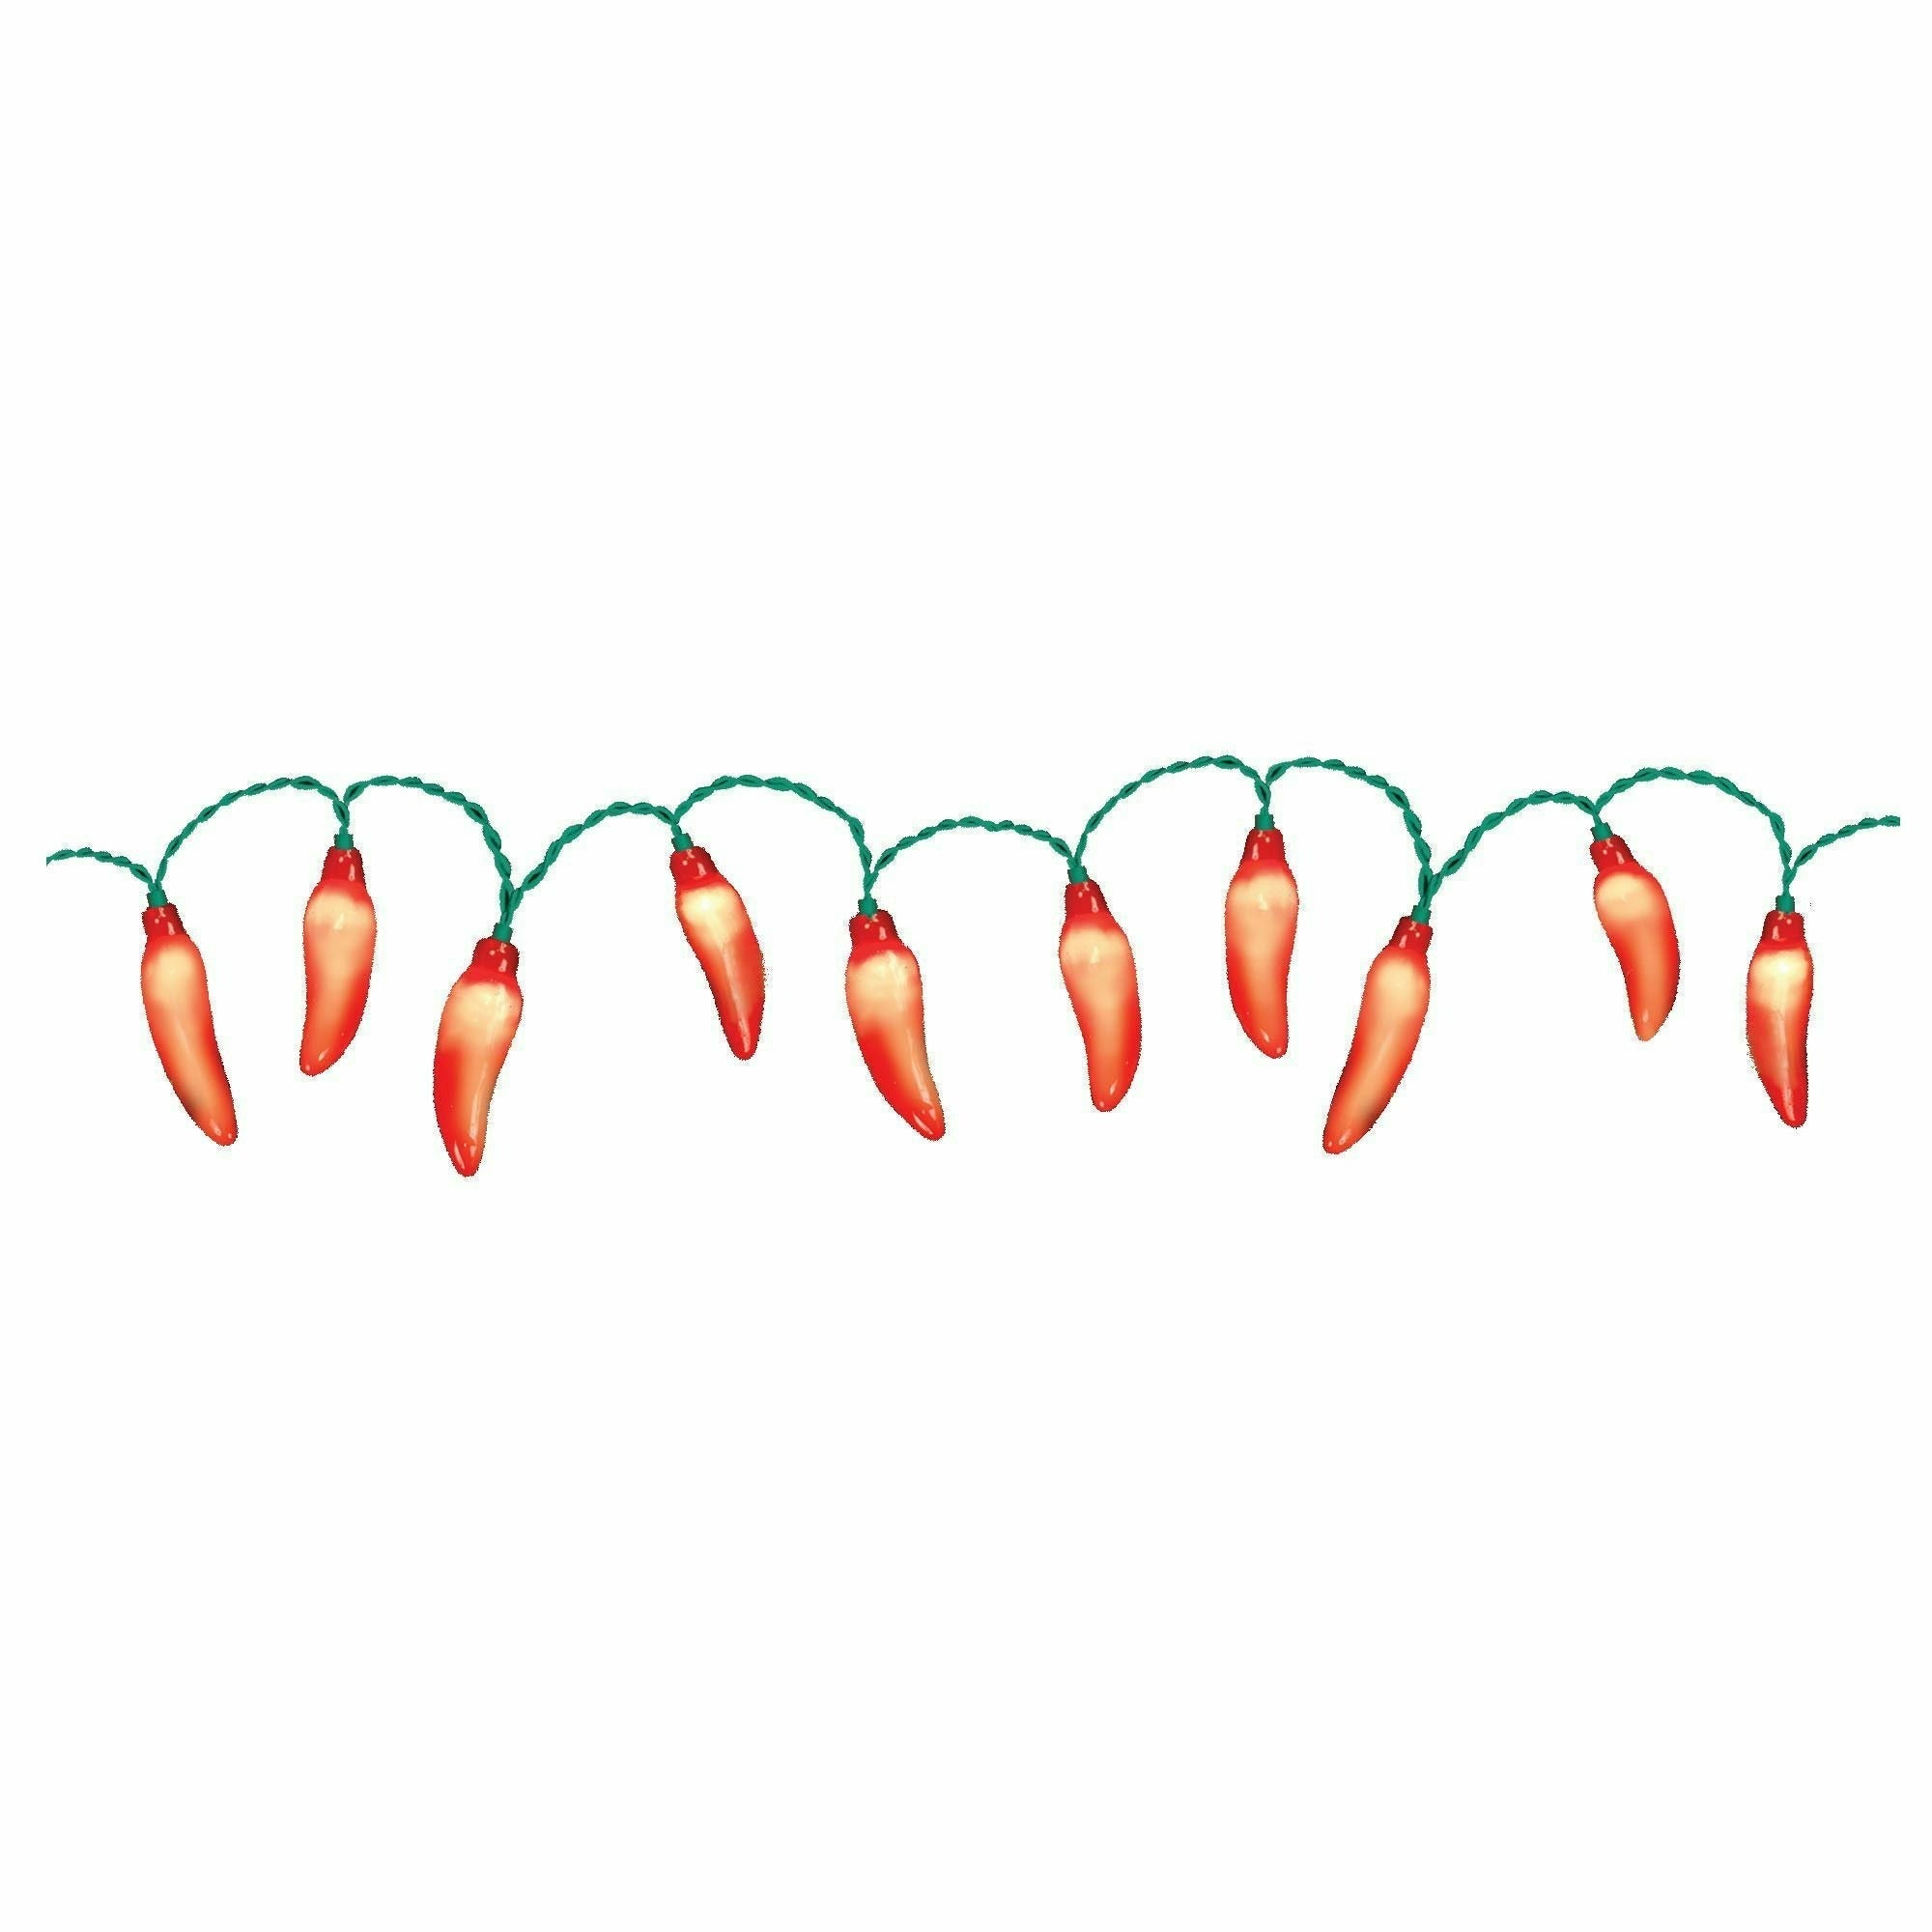 Amscan HOLIDAY: FIESTA Chili Pepper String Lights